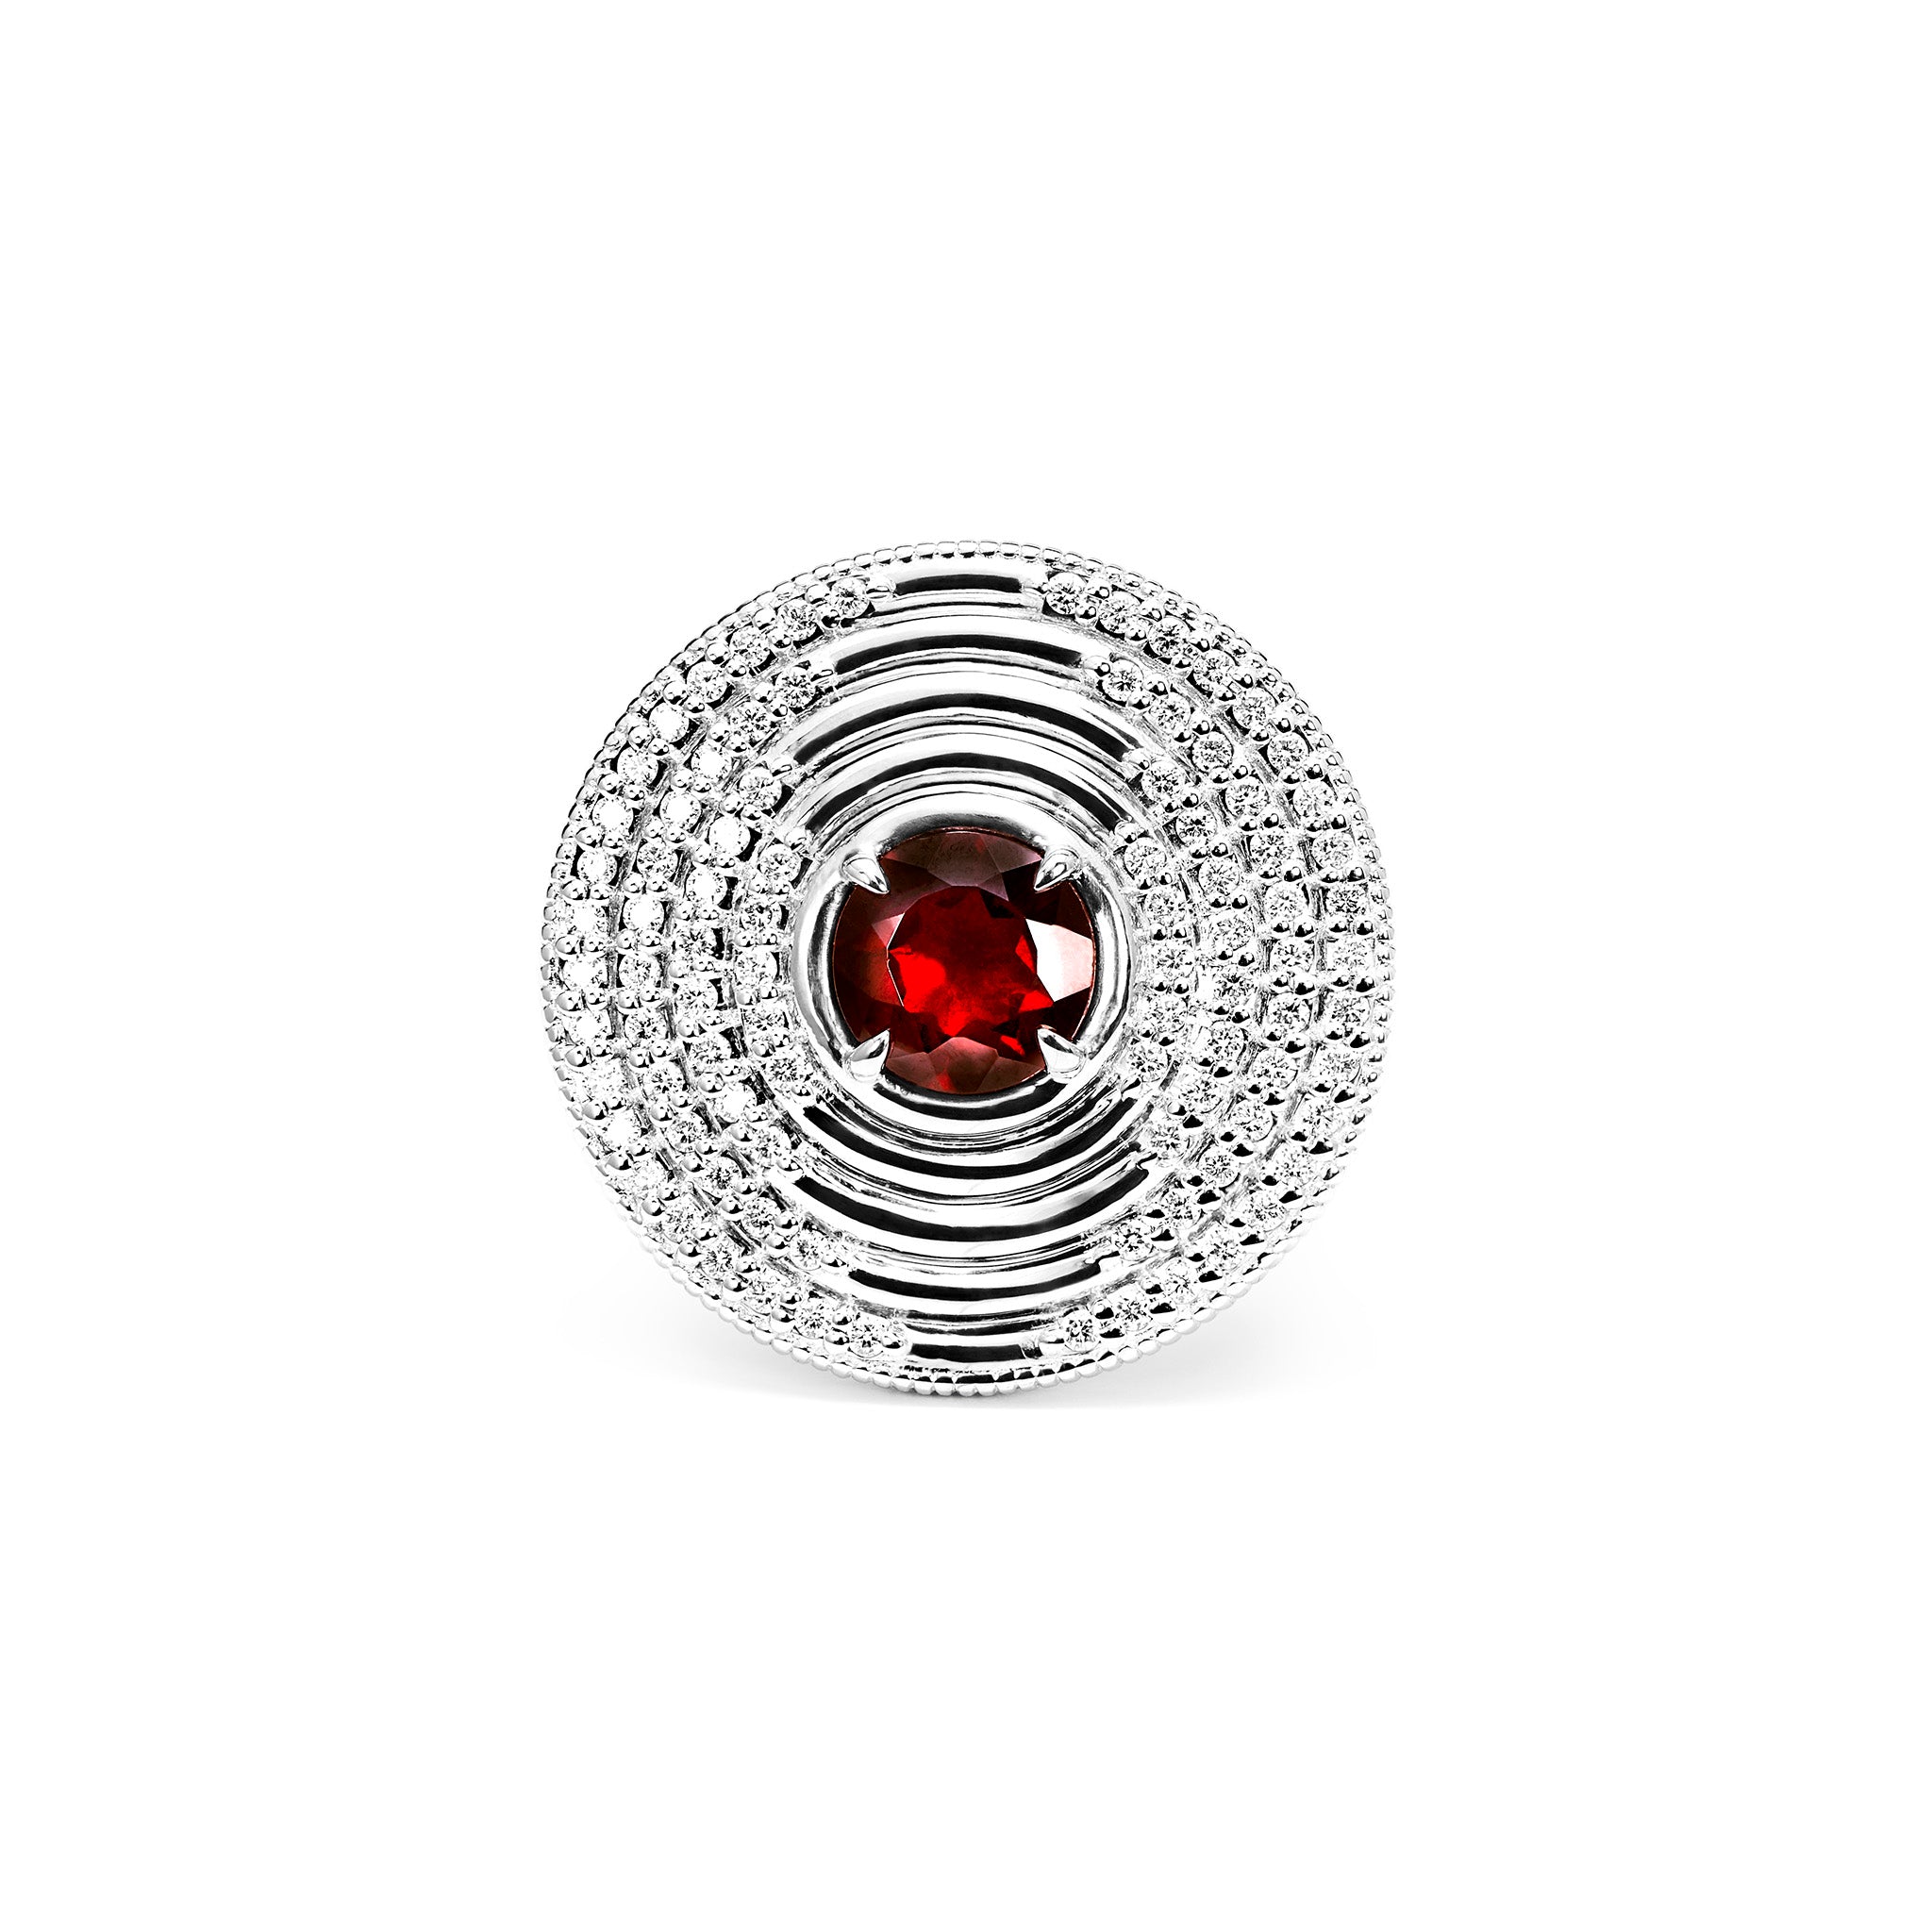 Max Round Ring With Garnet And Diamonds